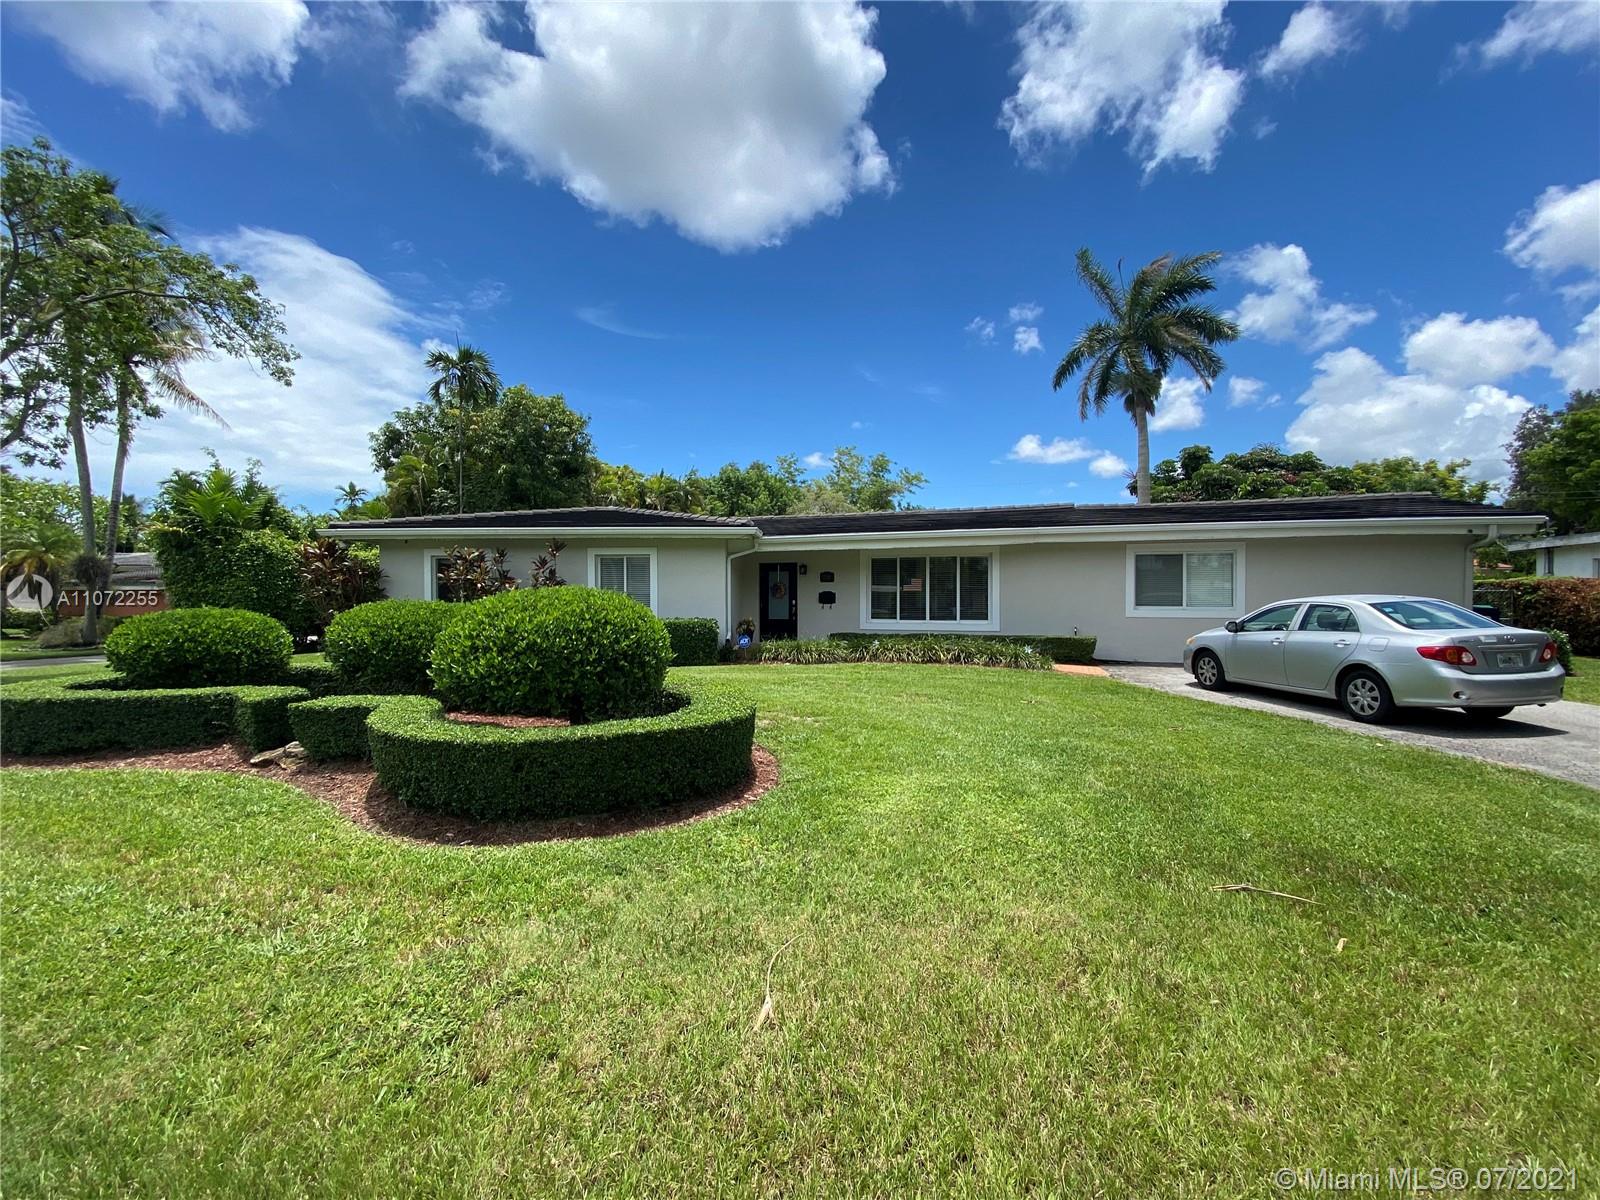 Photo 1 of 7310 60th St in Miami - MLS A11072255